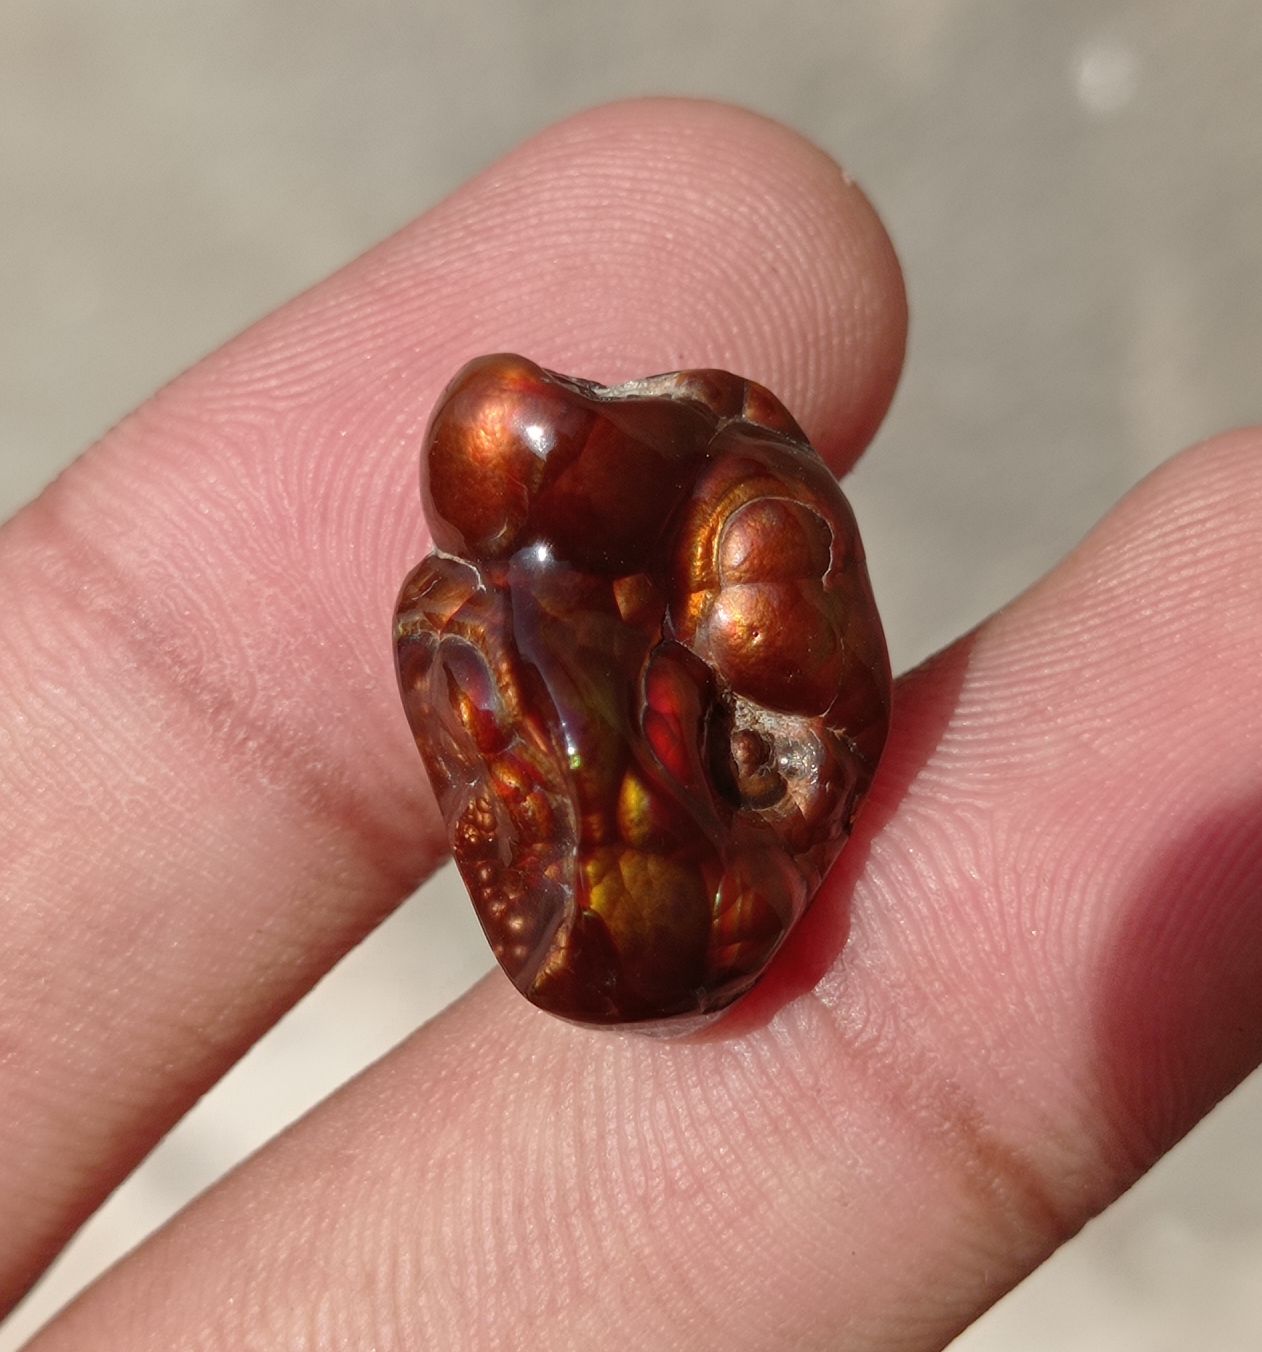 17.8ct Carved Fire Agate, Rare Fire Agate, Aatshi Aqeeq, Suitable For Pendant - Dimensions 20x15x10mm